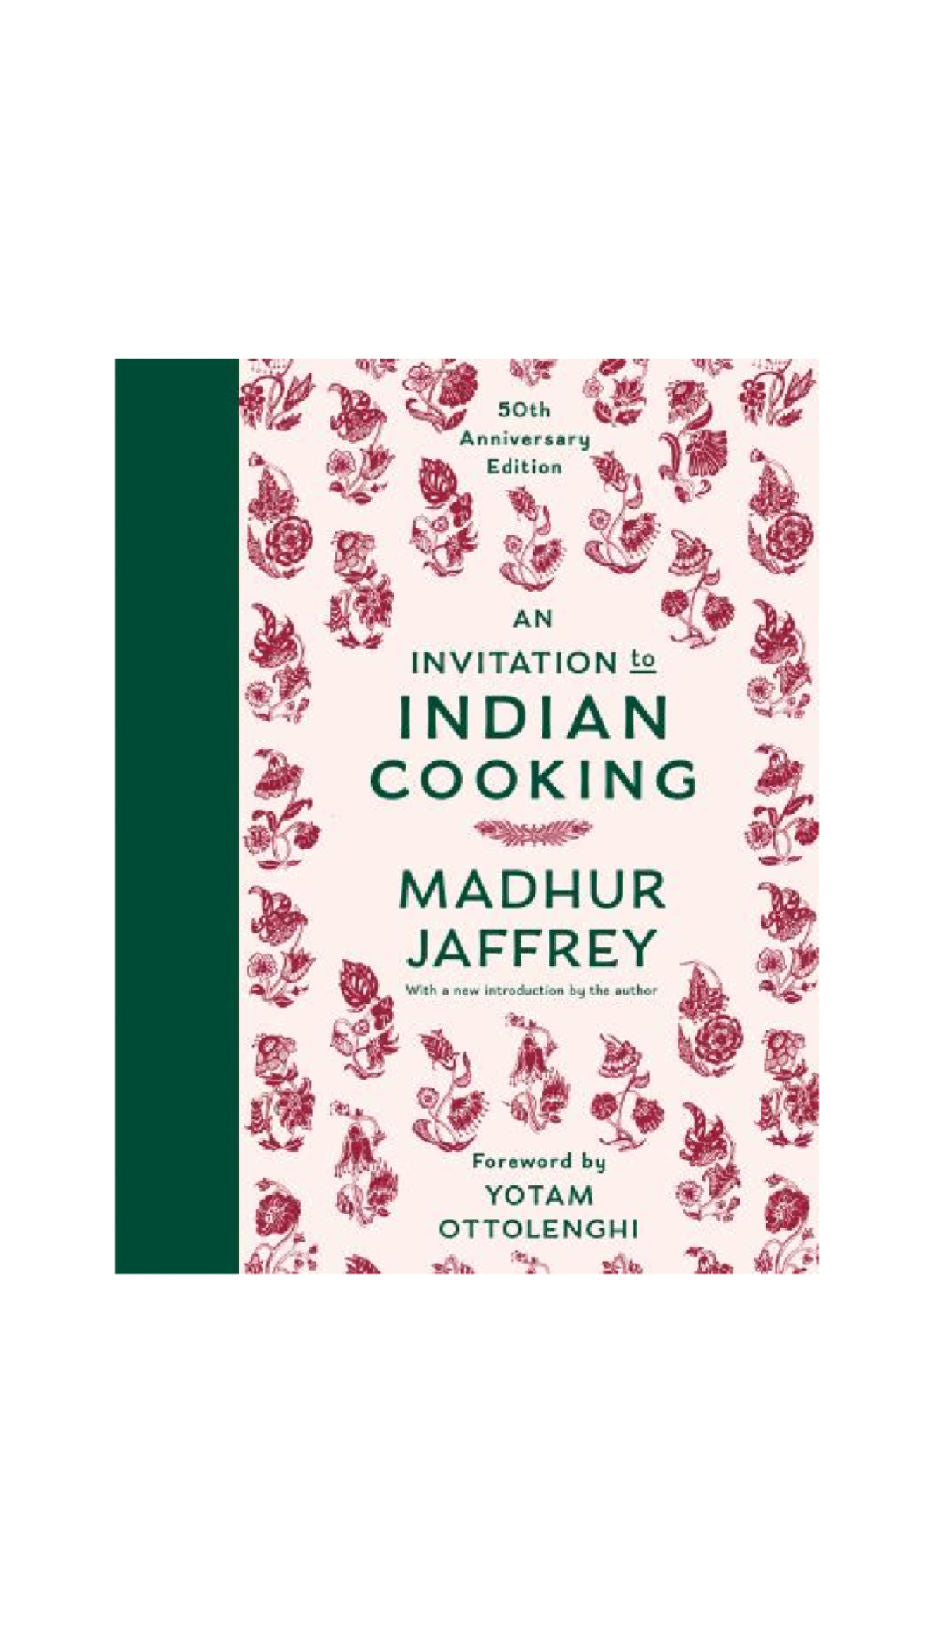 An Invitation to Indian Cooking / MADHUR JAFFREY - COMING NOVEMBER 21ST!